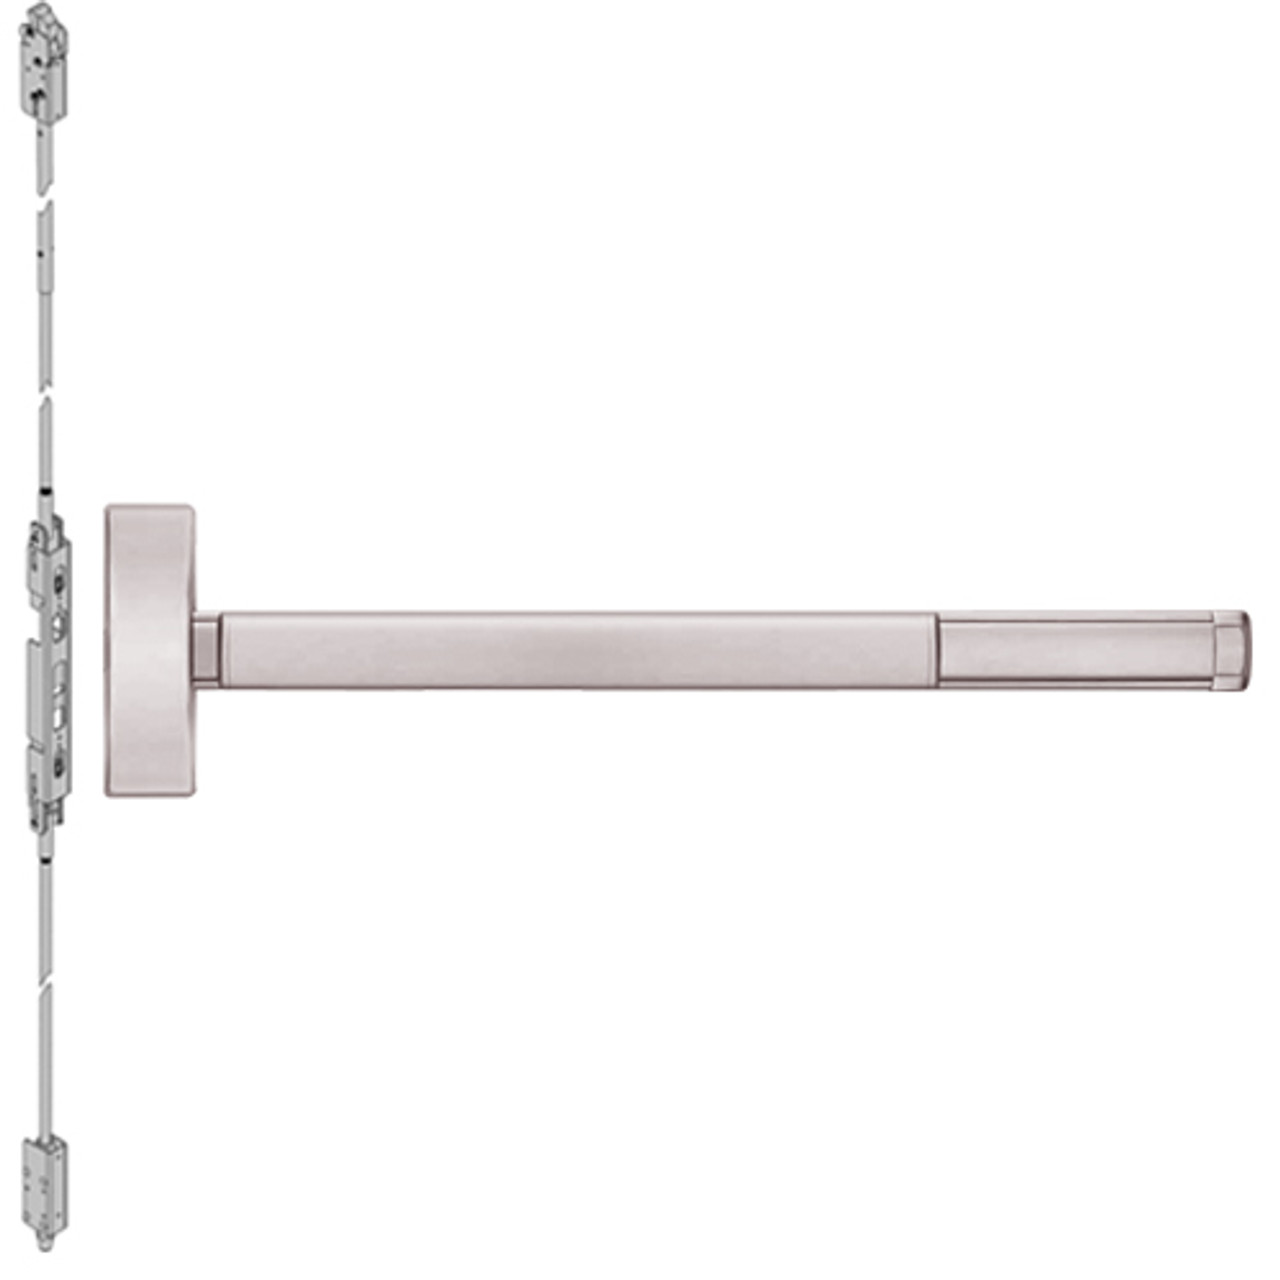 2803CD-628-36 PHI 2800 Series Non Fire Rated Concealed Vertical Rod Exit Device Prepped for Key Retracts Latchbolt in Satin Aluminum Finish